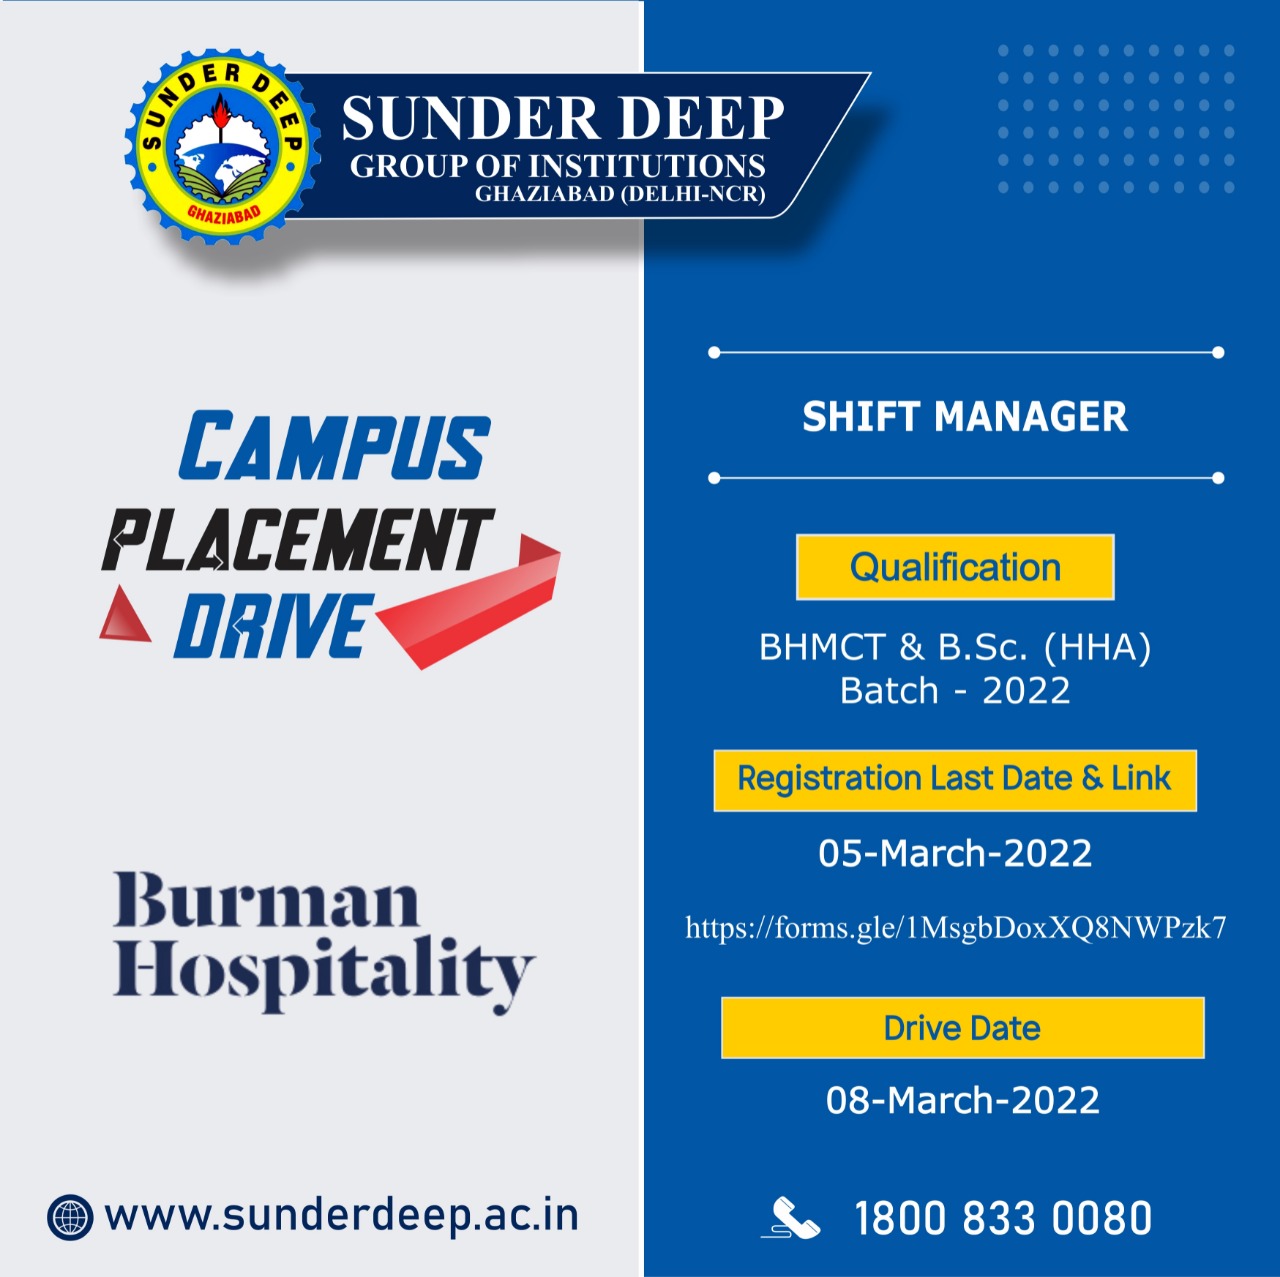 Virtual Placement Drive by Burman Hospitality